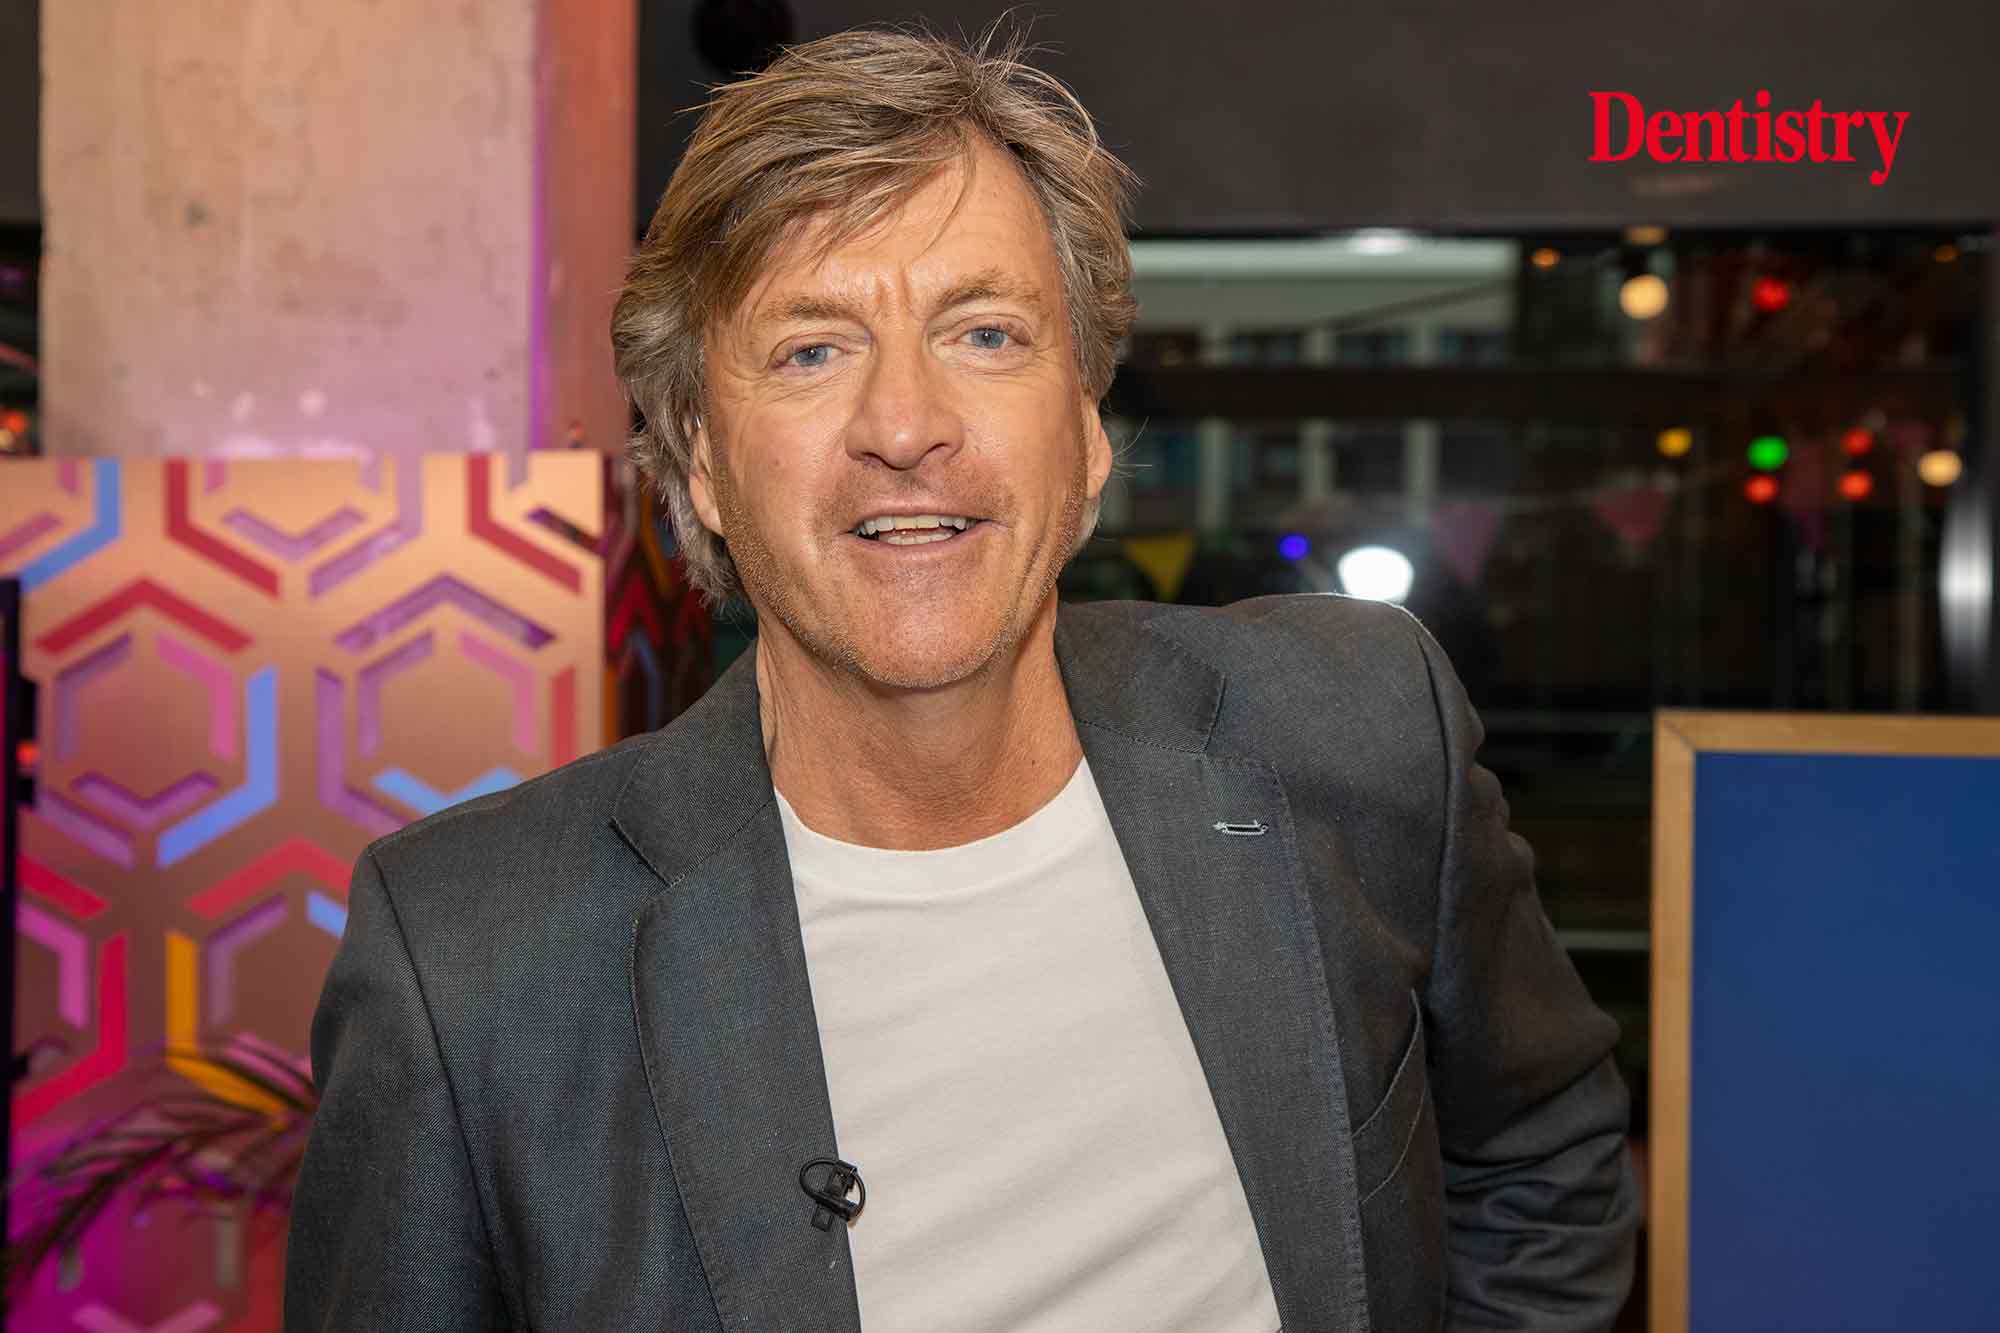 Good Morning Britain's Richard Madeley claims NHS dentists 'can't do extractions'